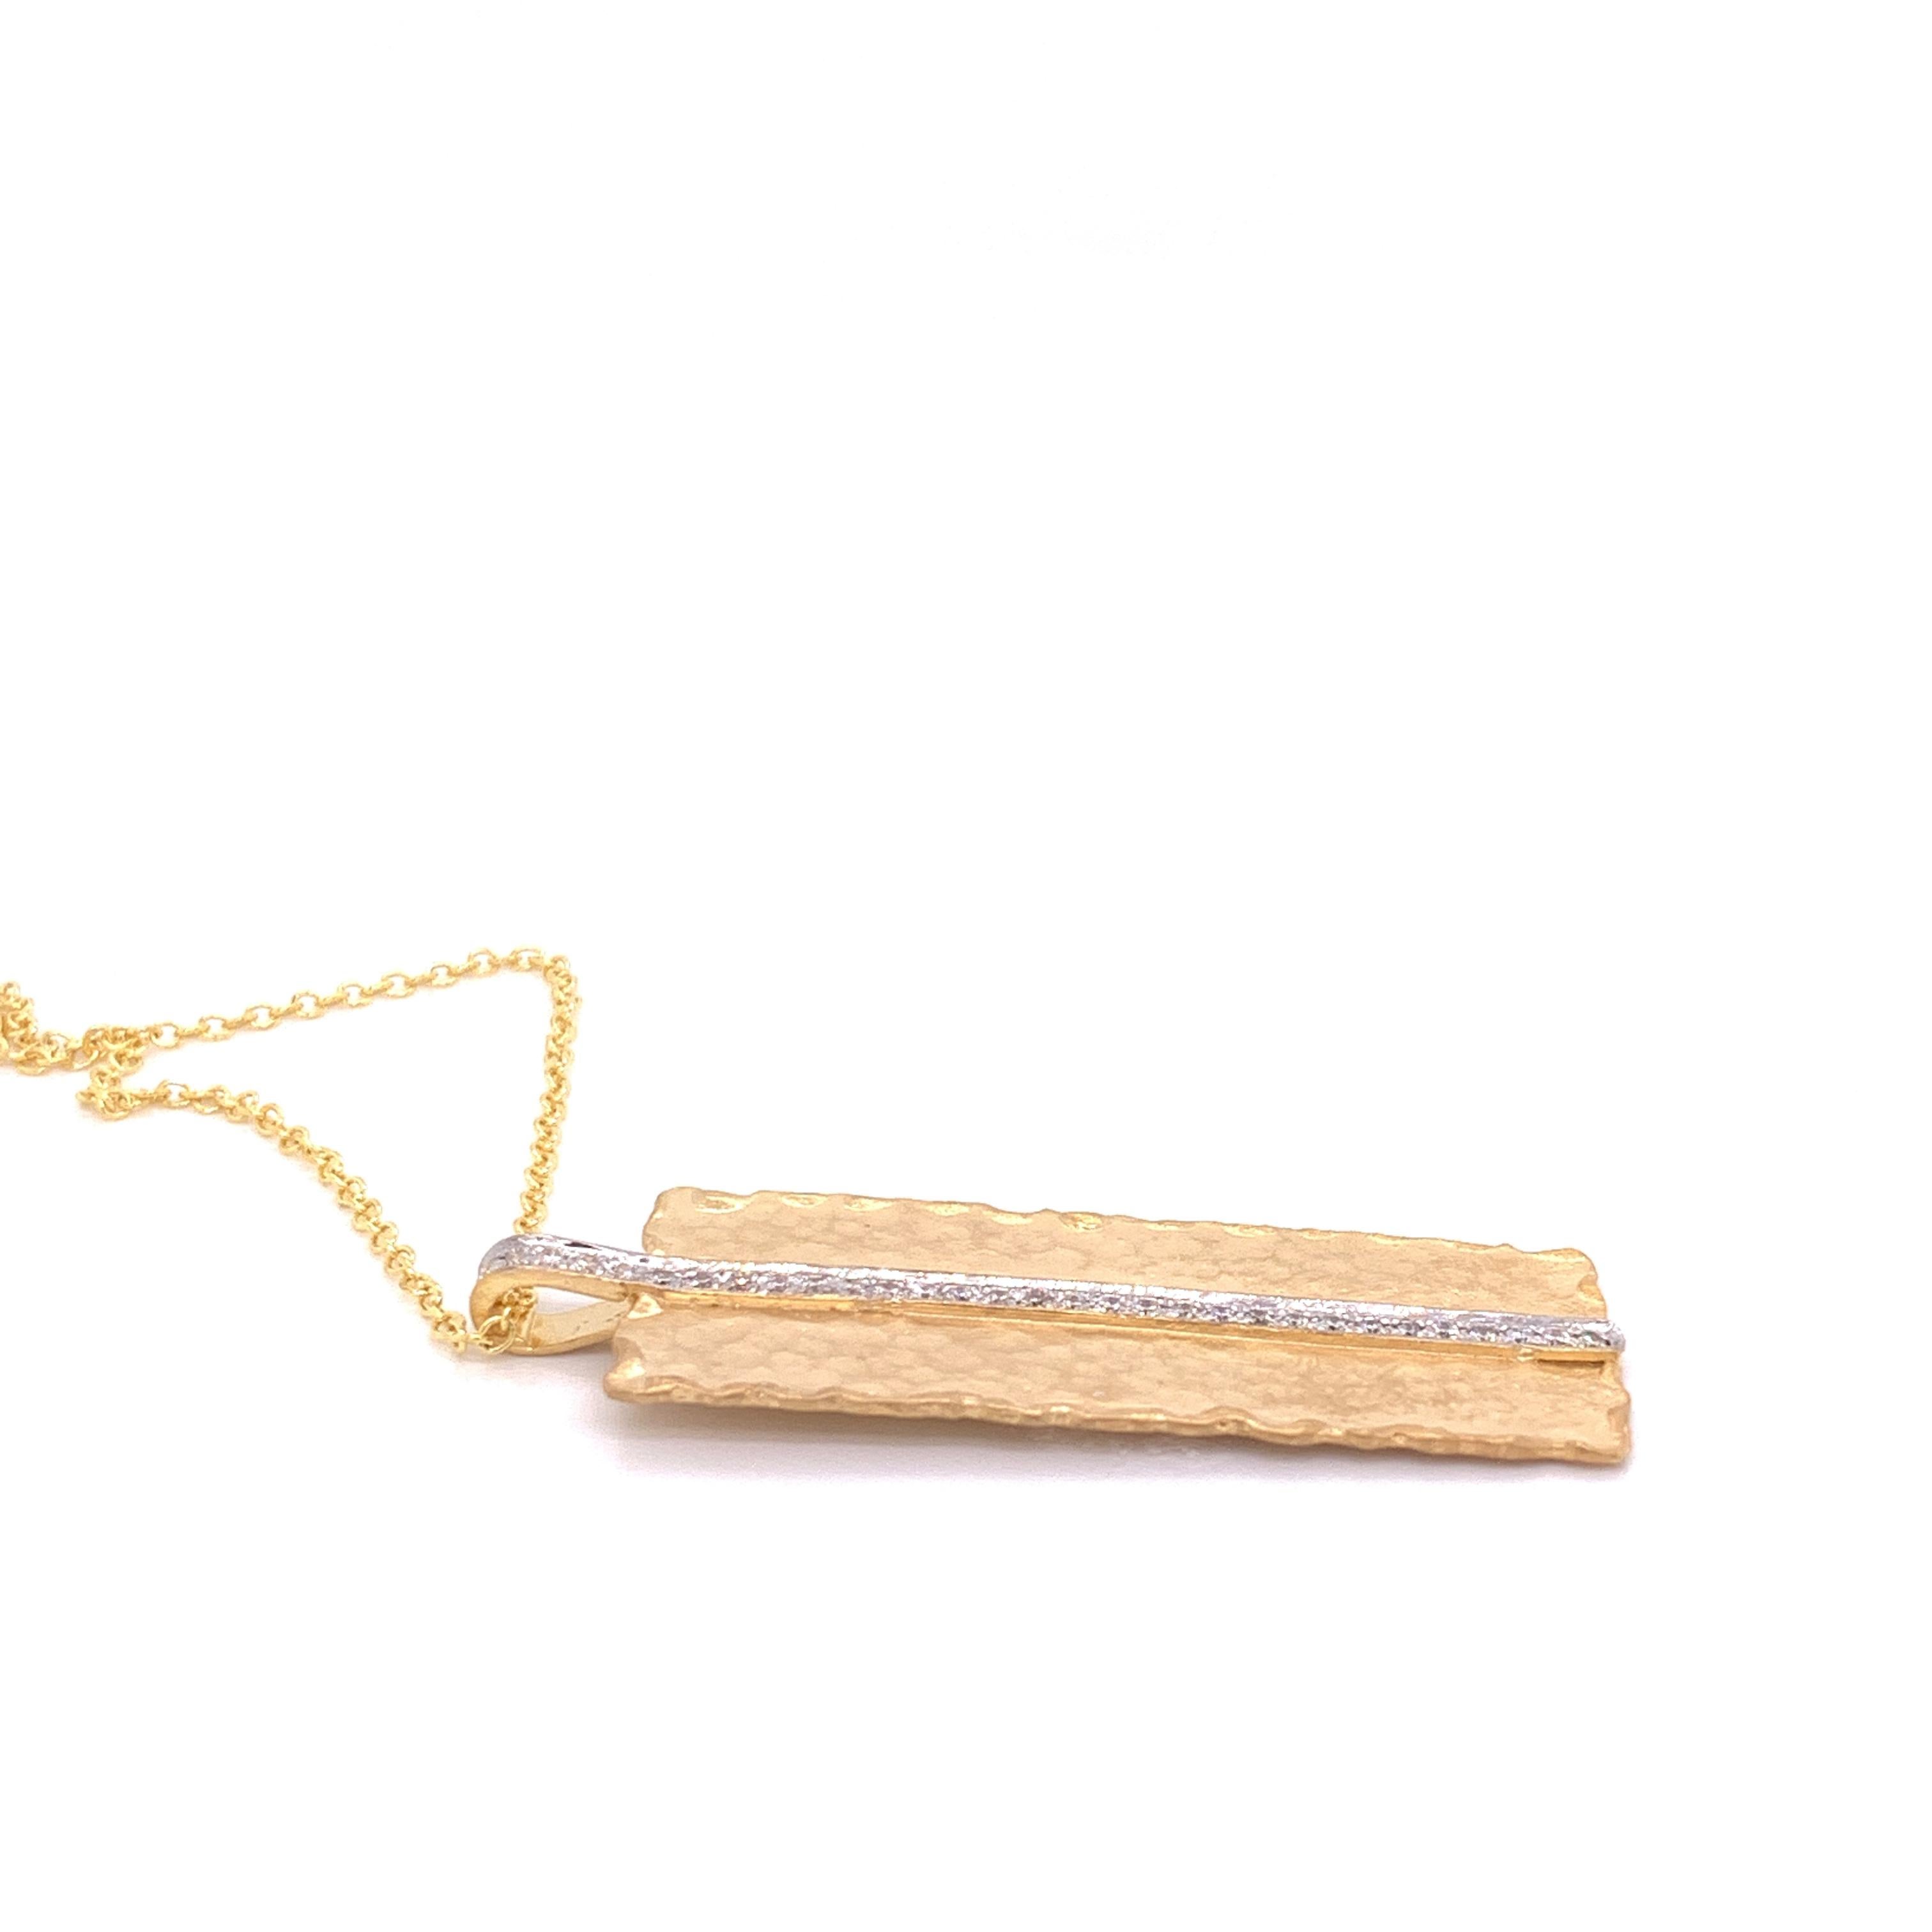 14 Karat Yellow Gold Hand-Crafted Matte and Hammer-Finished Ruffled Rectangular Pendant, Accented with 0.23 Carats of Pave Set Diamonds, Sliding on a 16